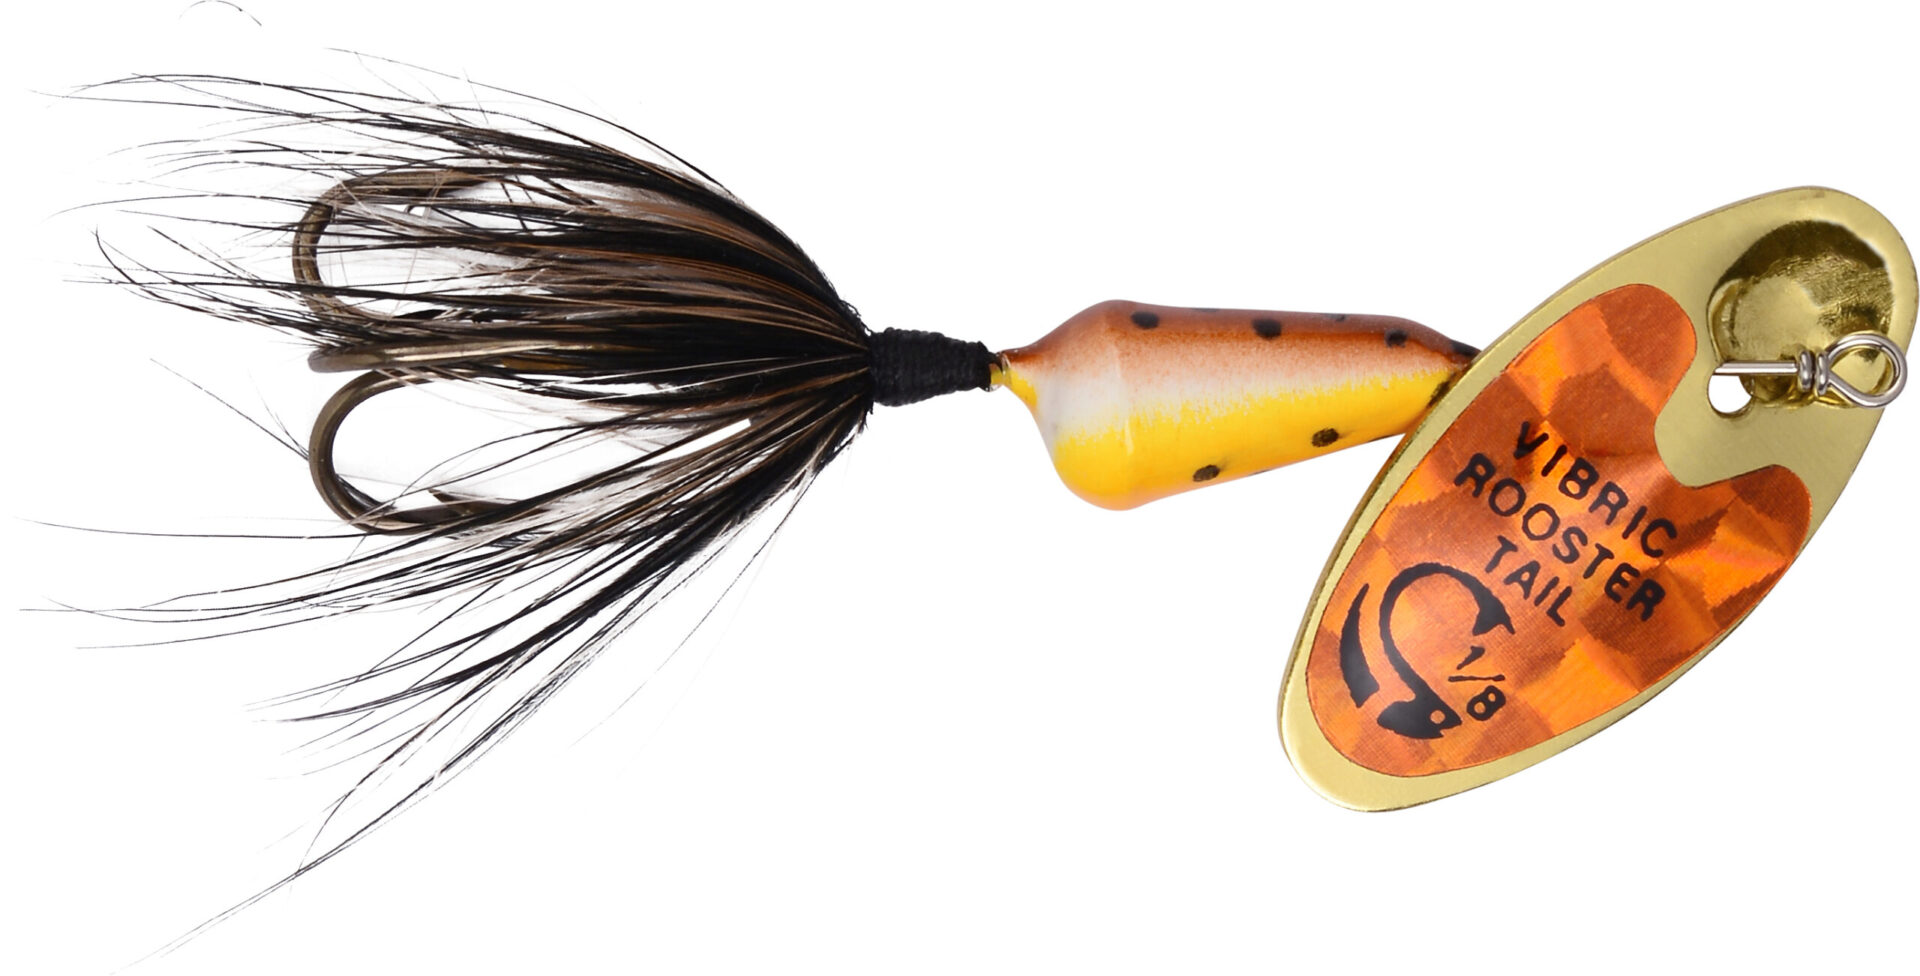 Vibric Rooster Tail - 1/8oz ~ Flame Mylar - Mr FLY